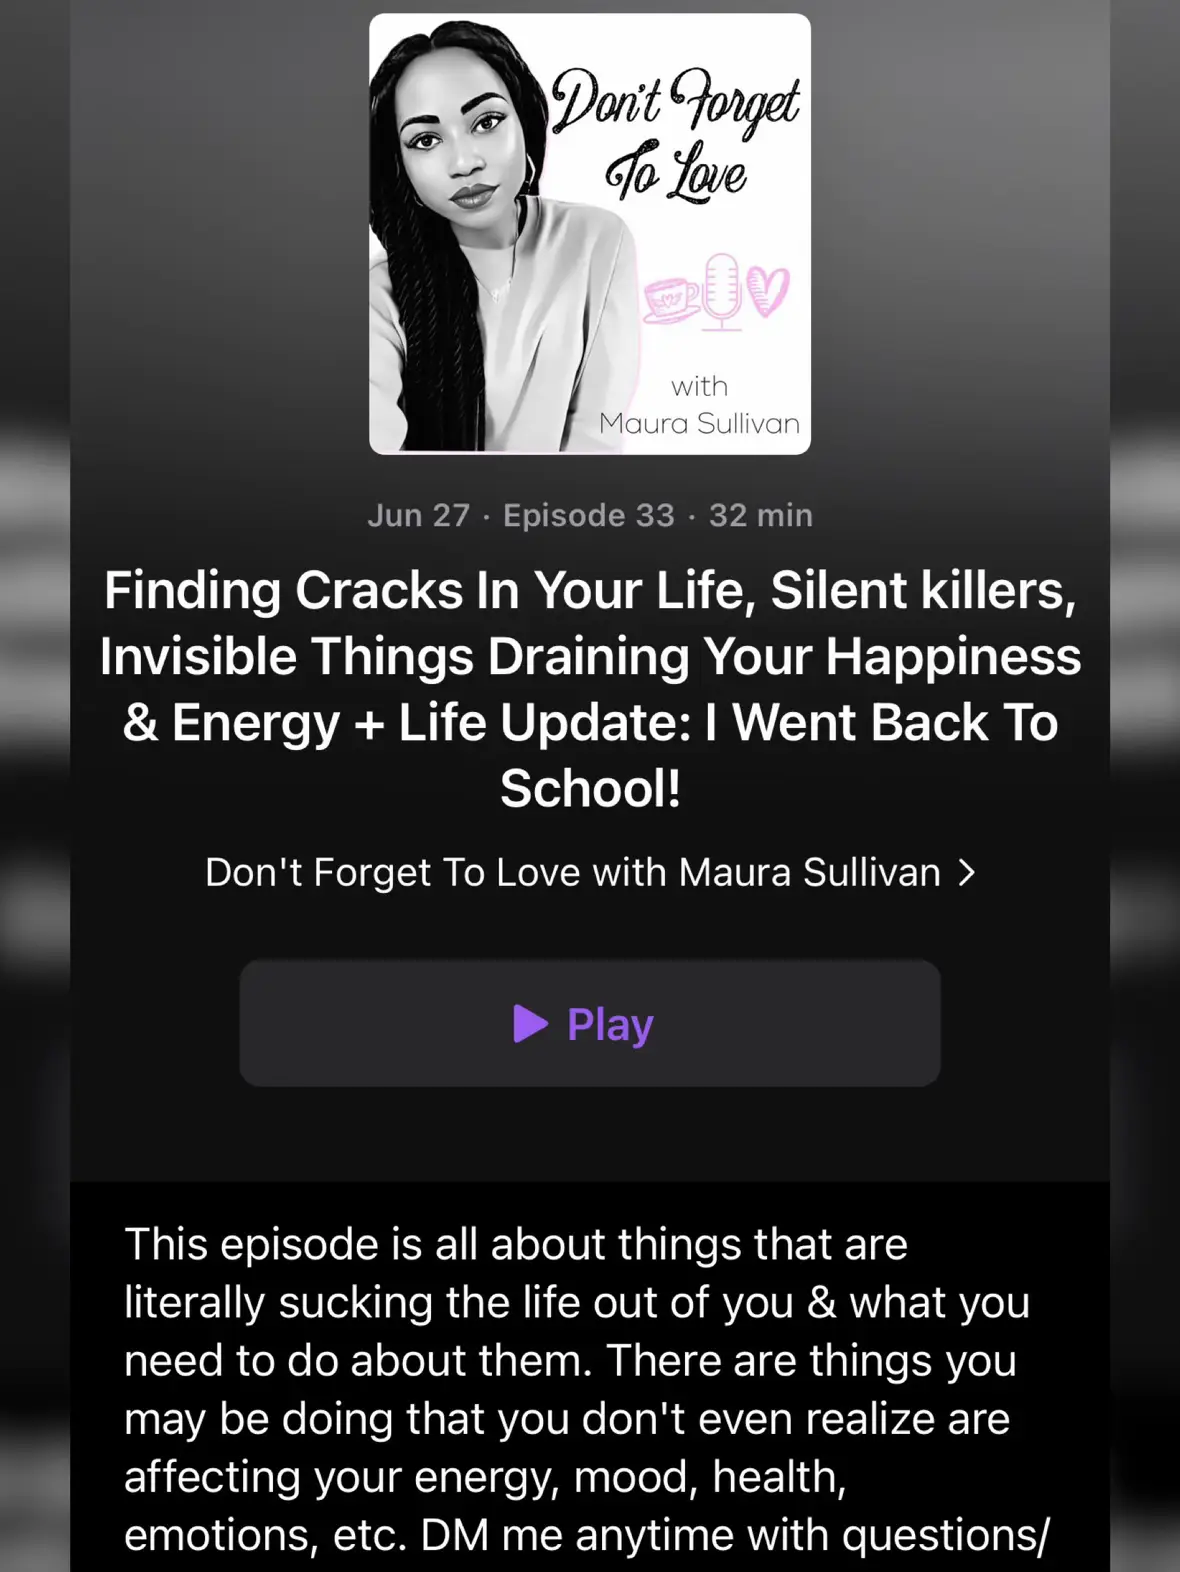 Love Your Life - Education Podcast